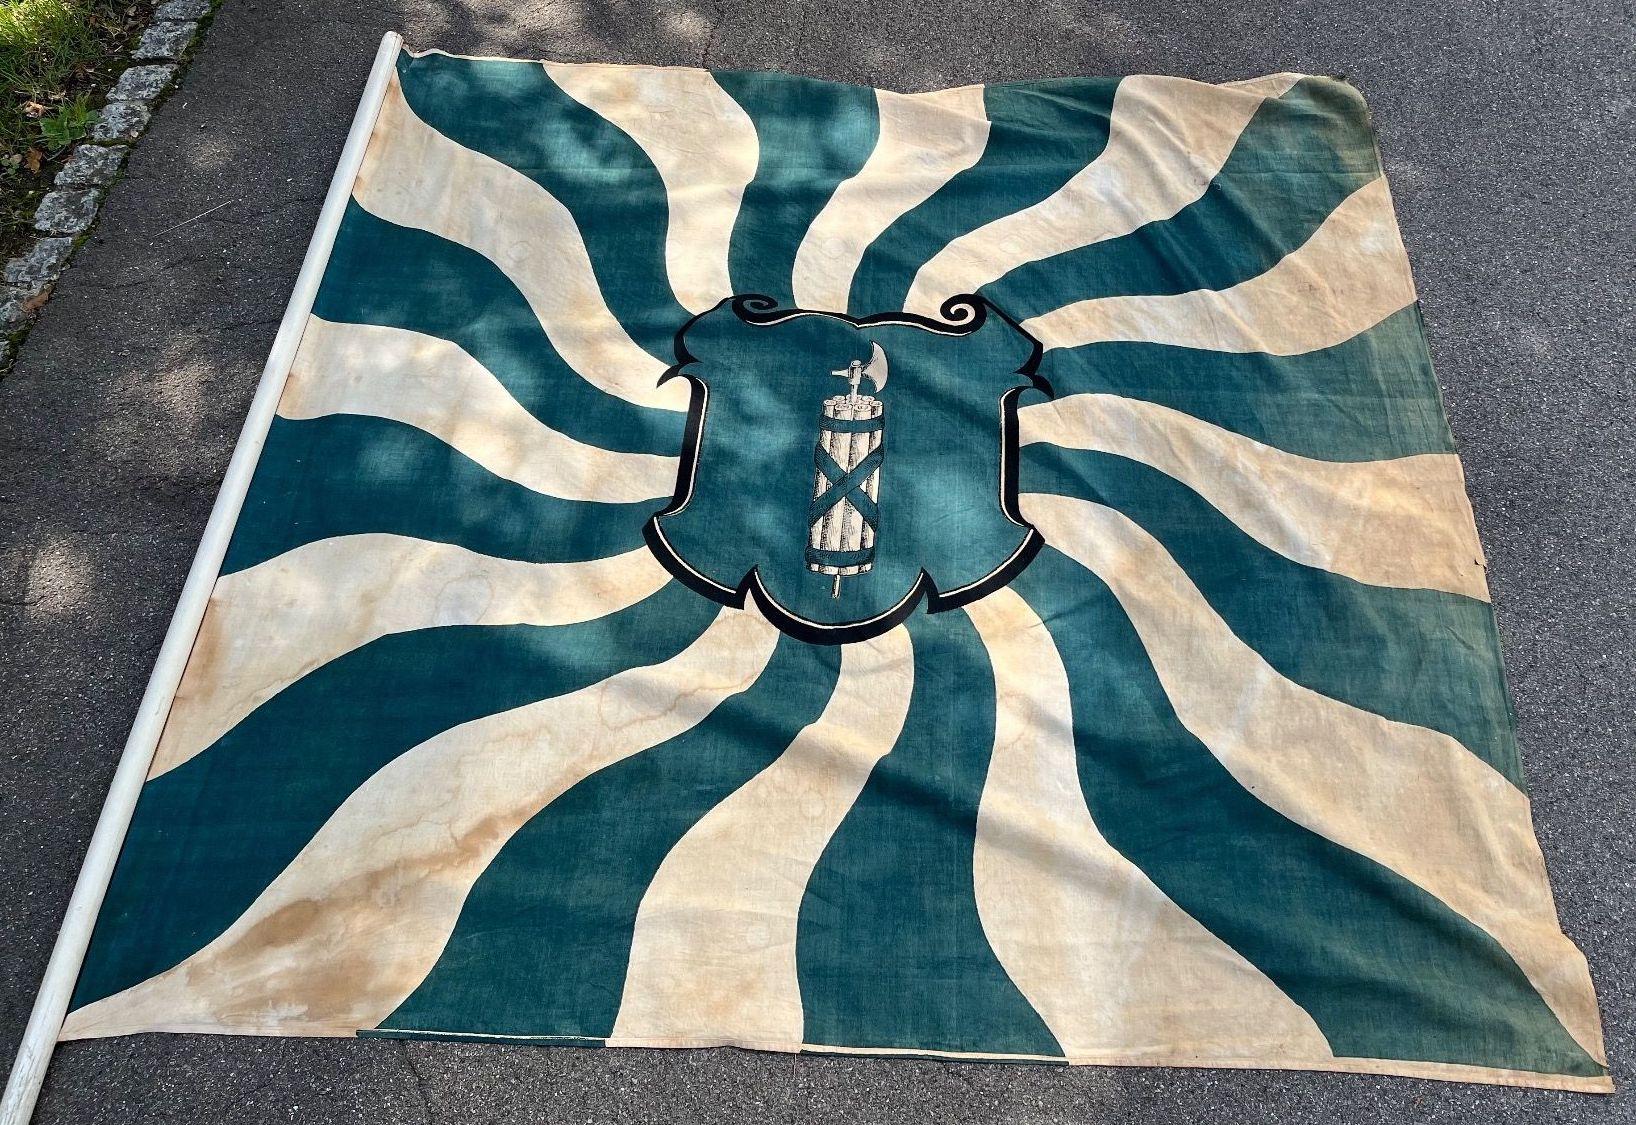 [Flamed flag of St. Gallen canton]